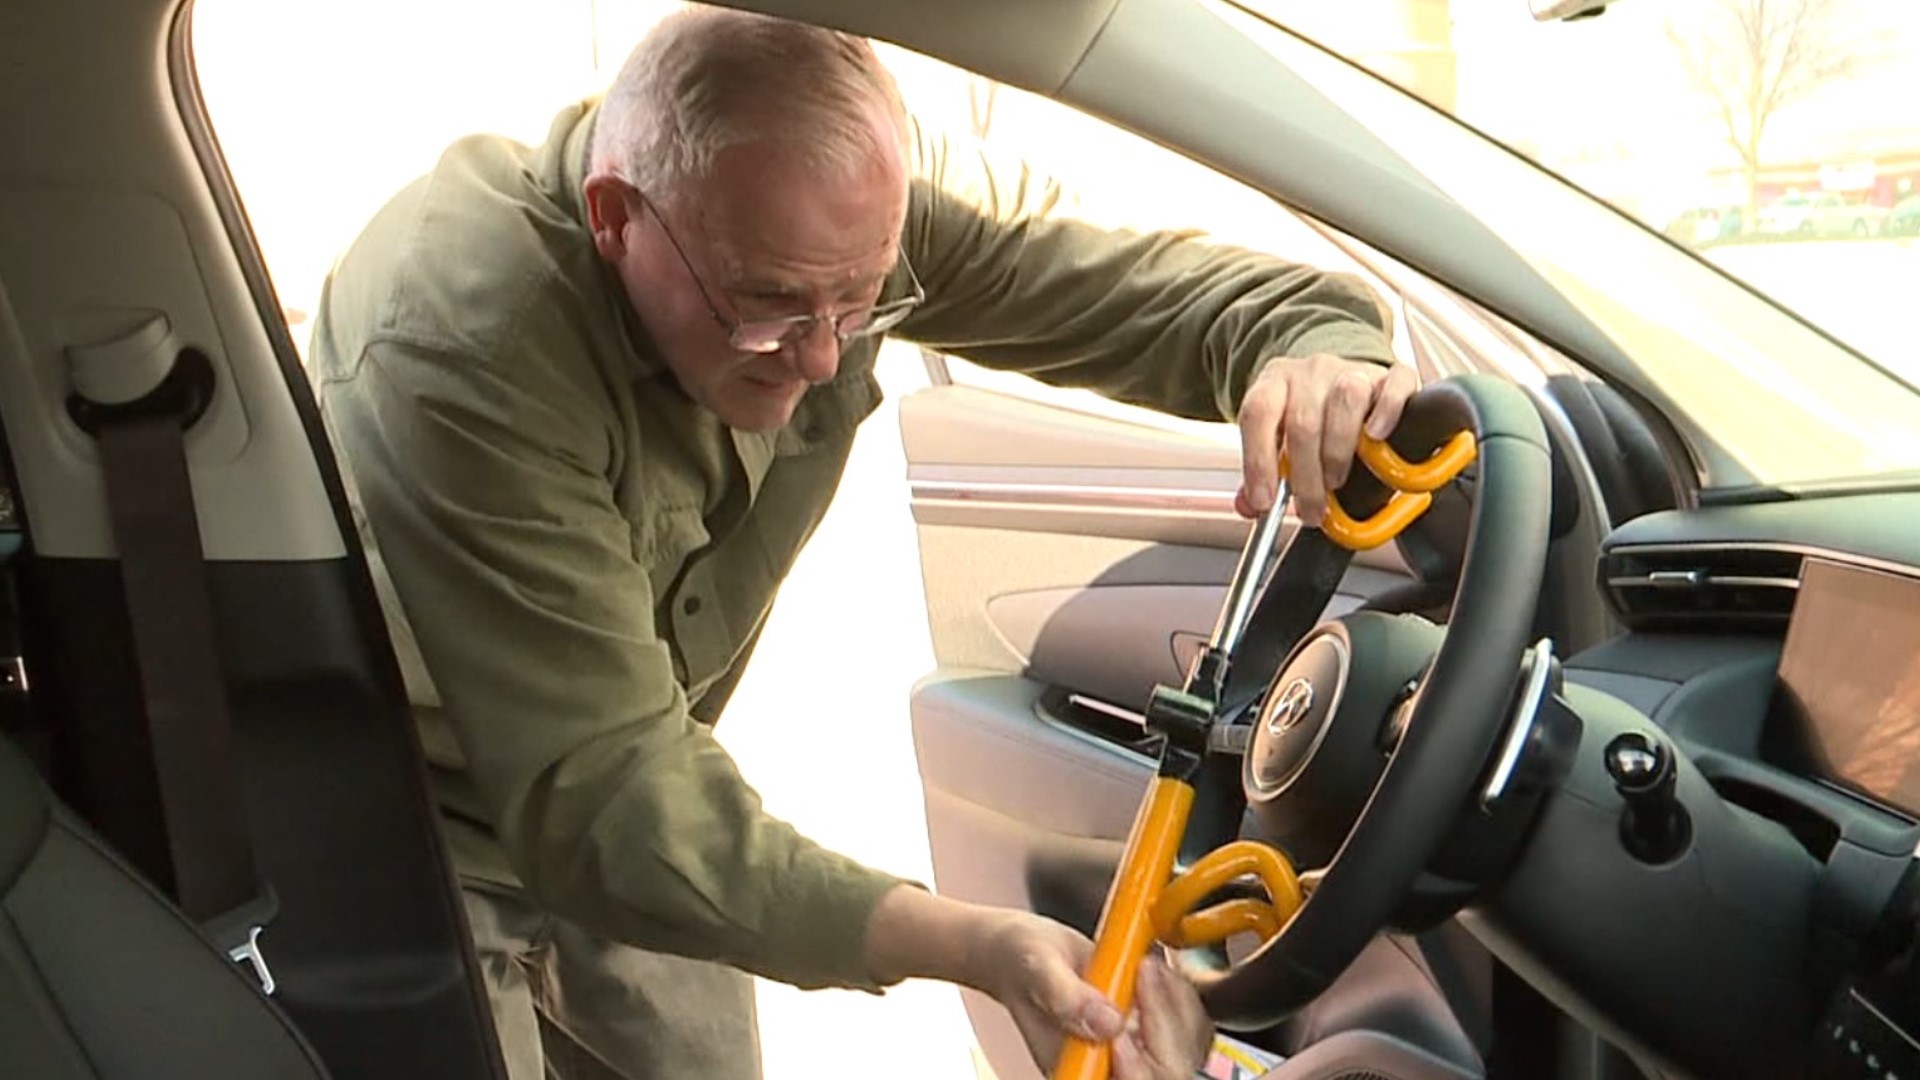 The Lancaster County Auto Crime Task Force hands out steering wheel locks to prevent car thefts in south-central Pa.